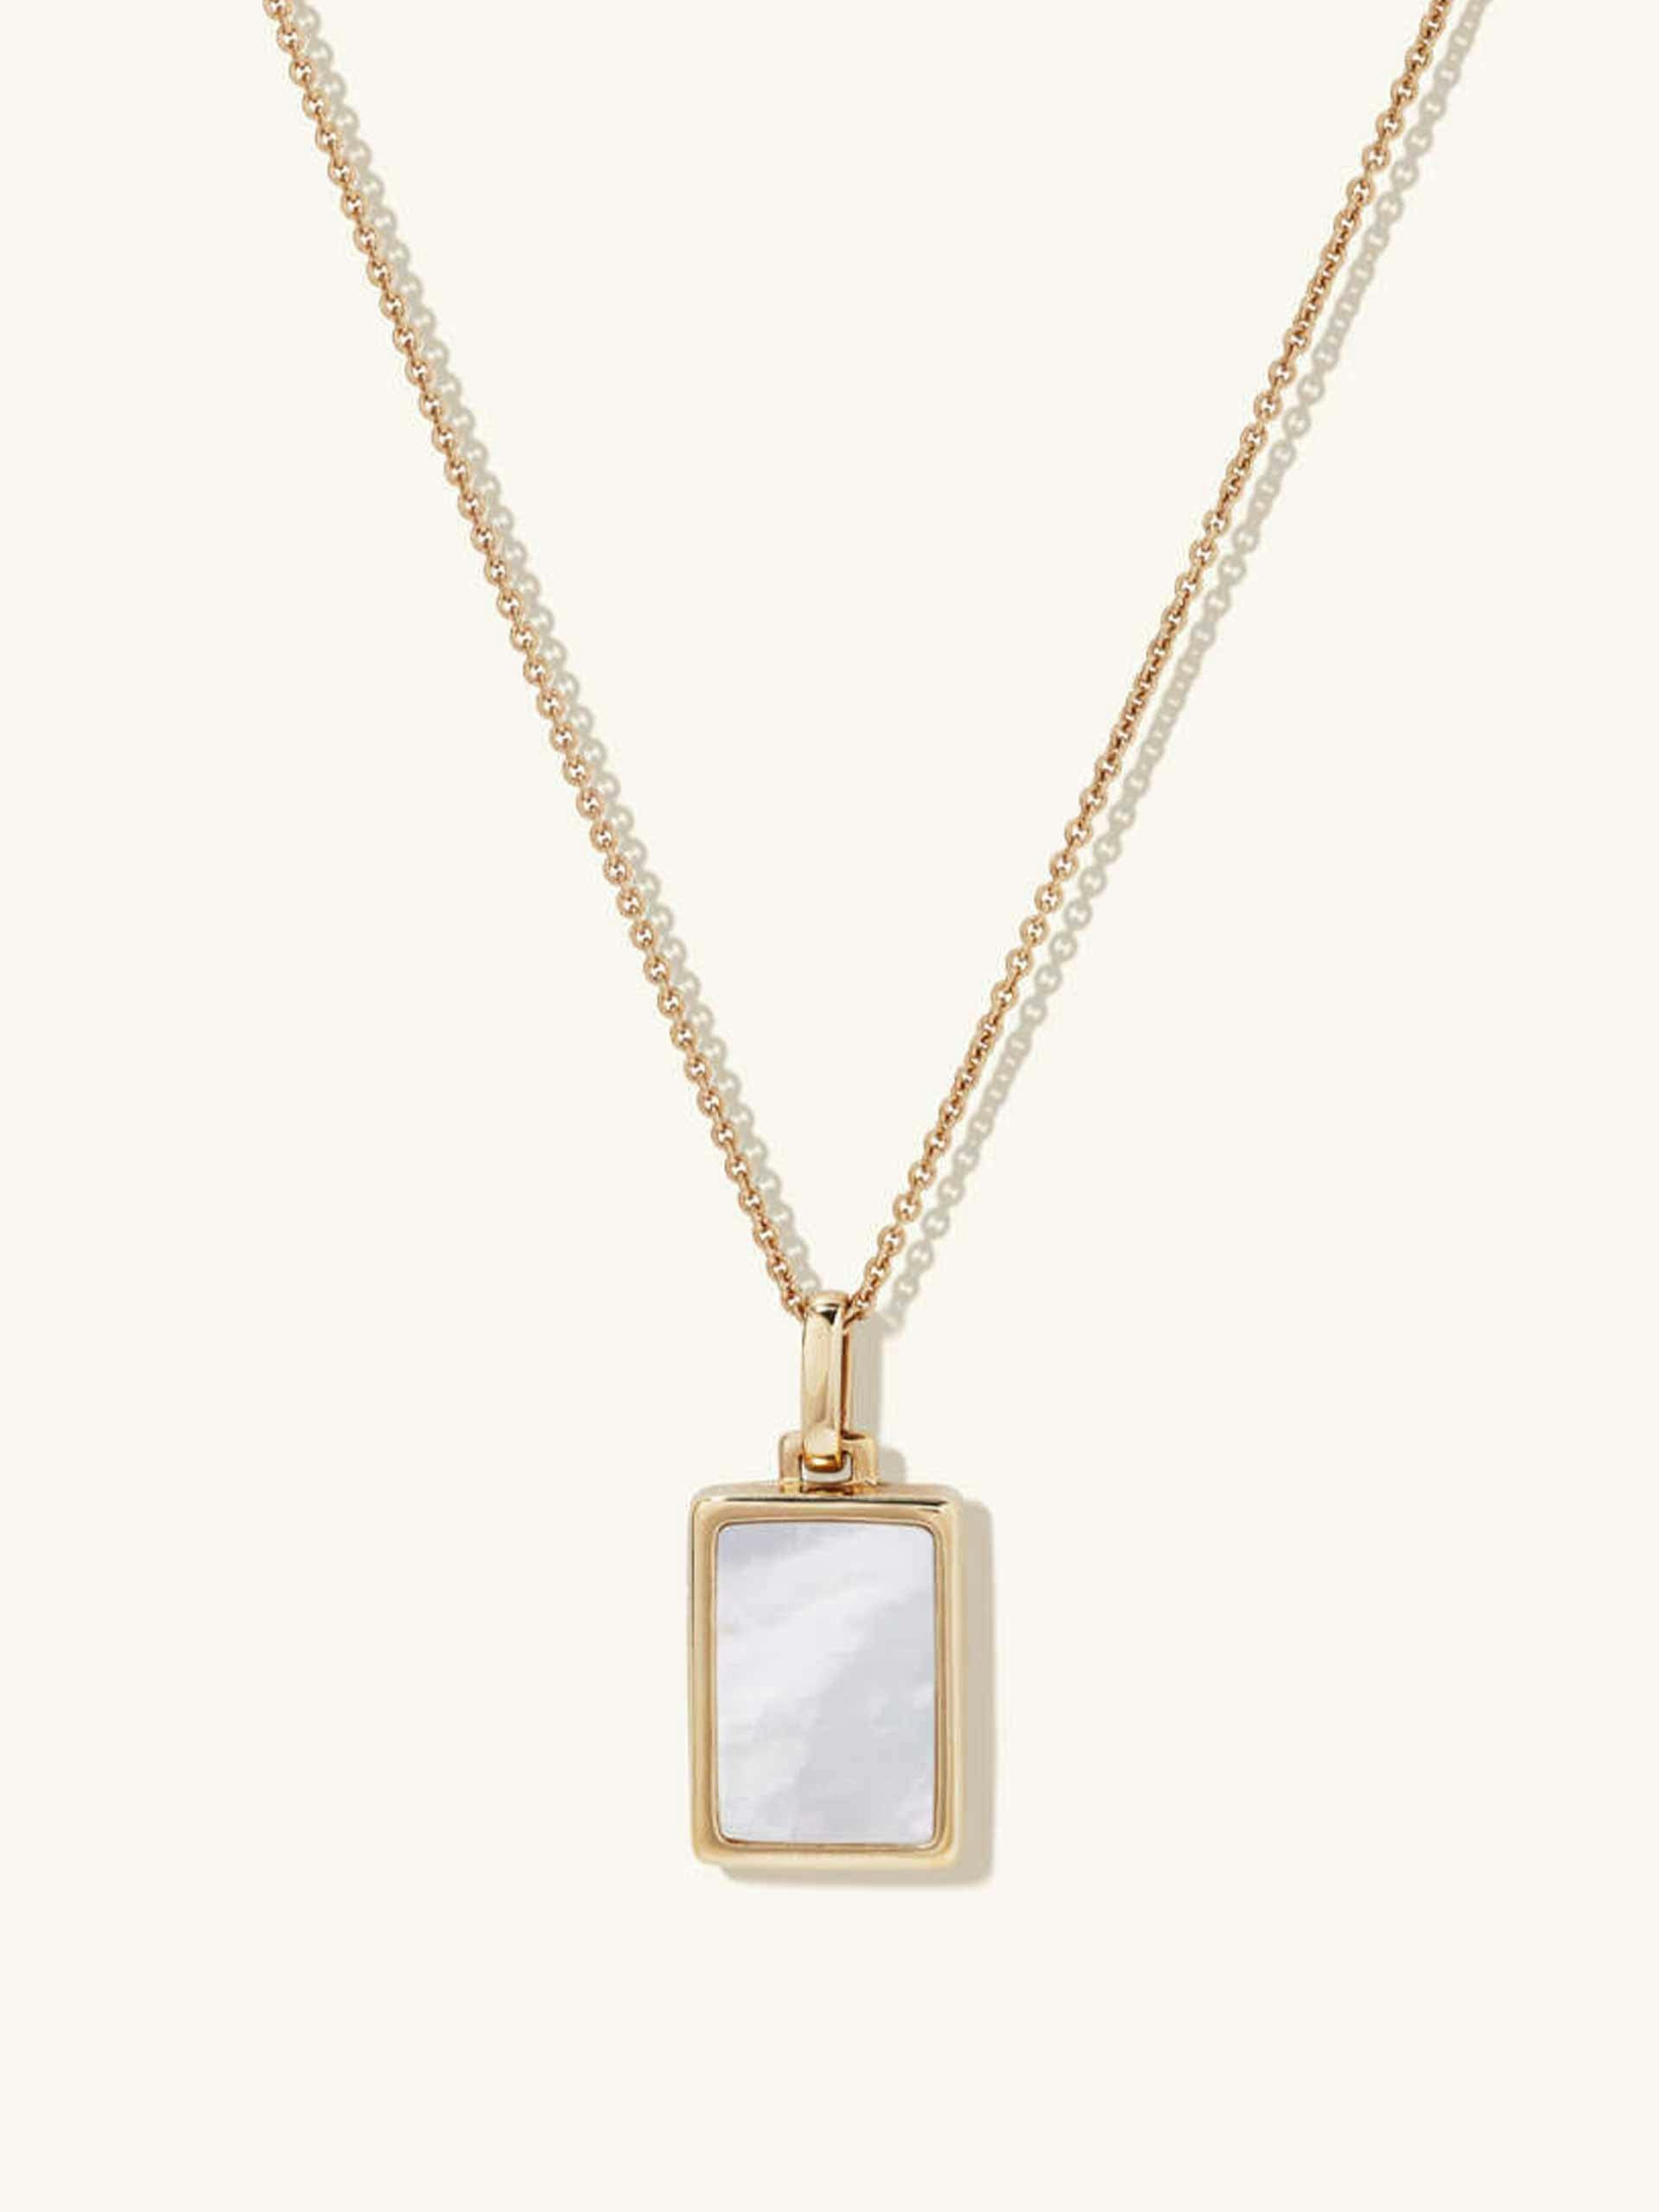 Pearl rectangle locket necklace